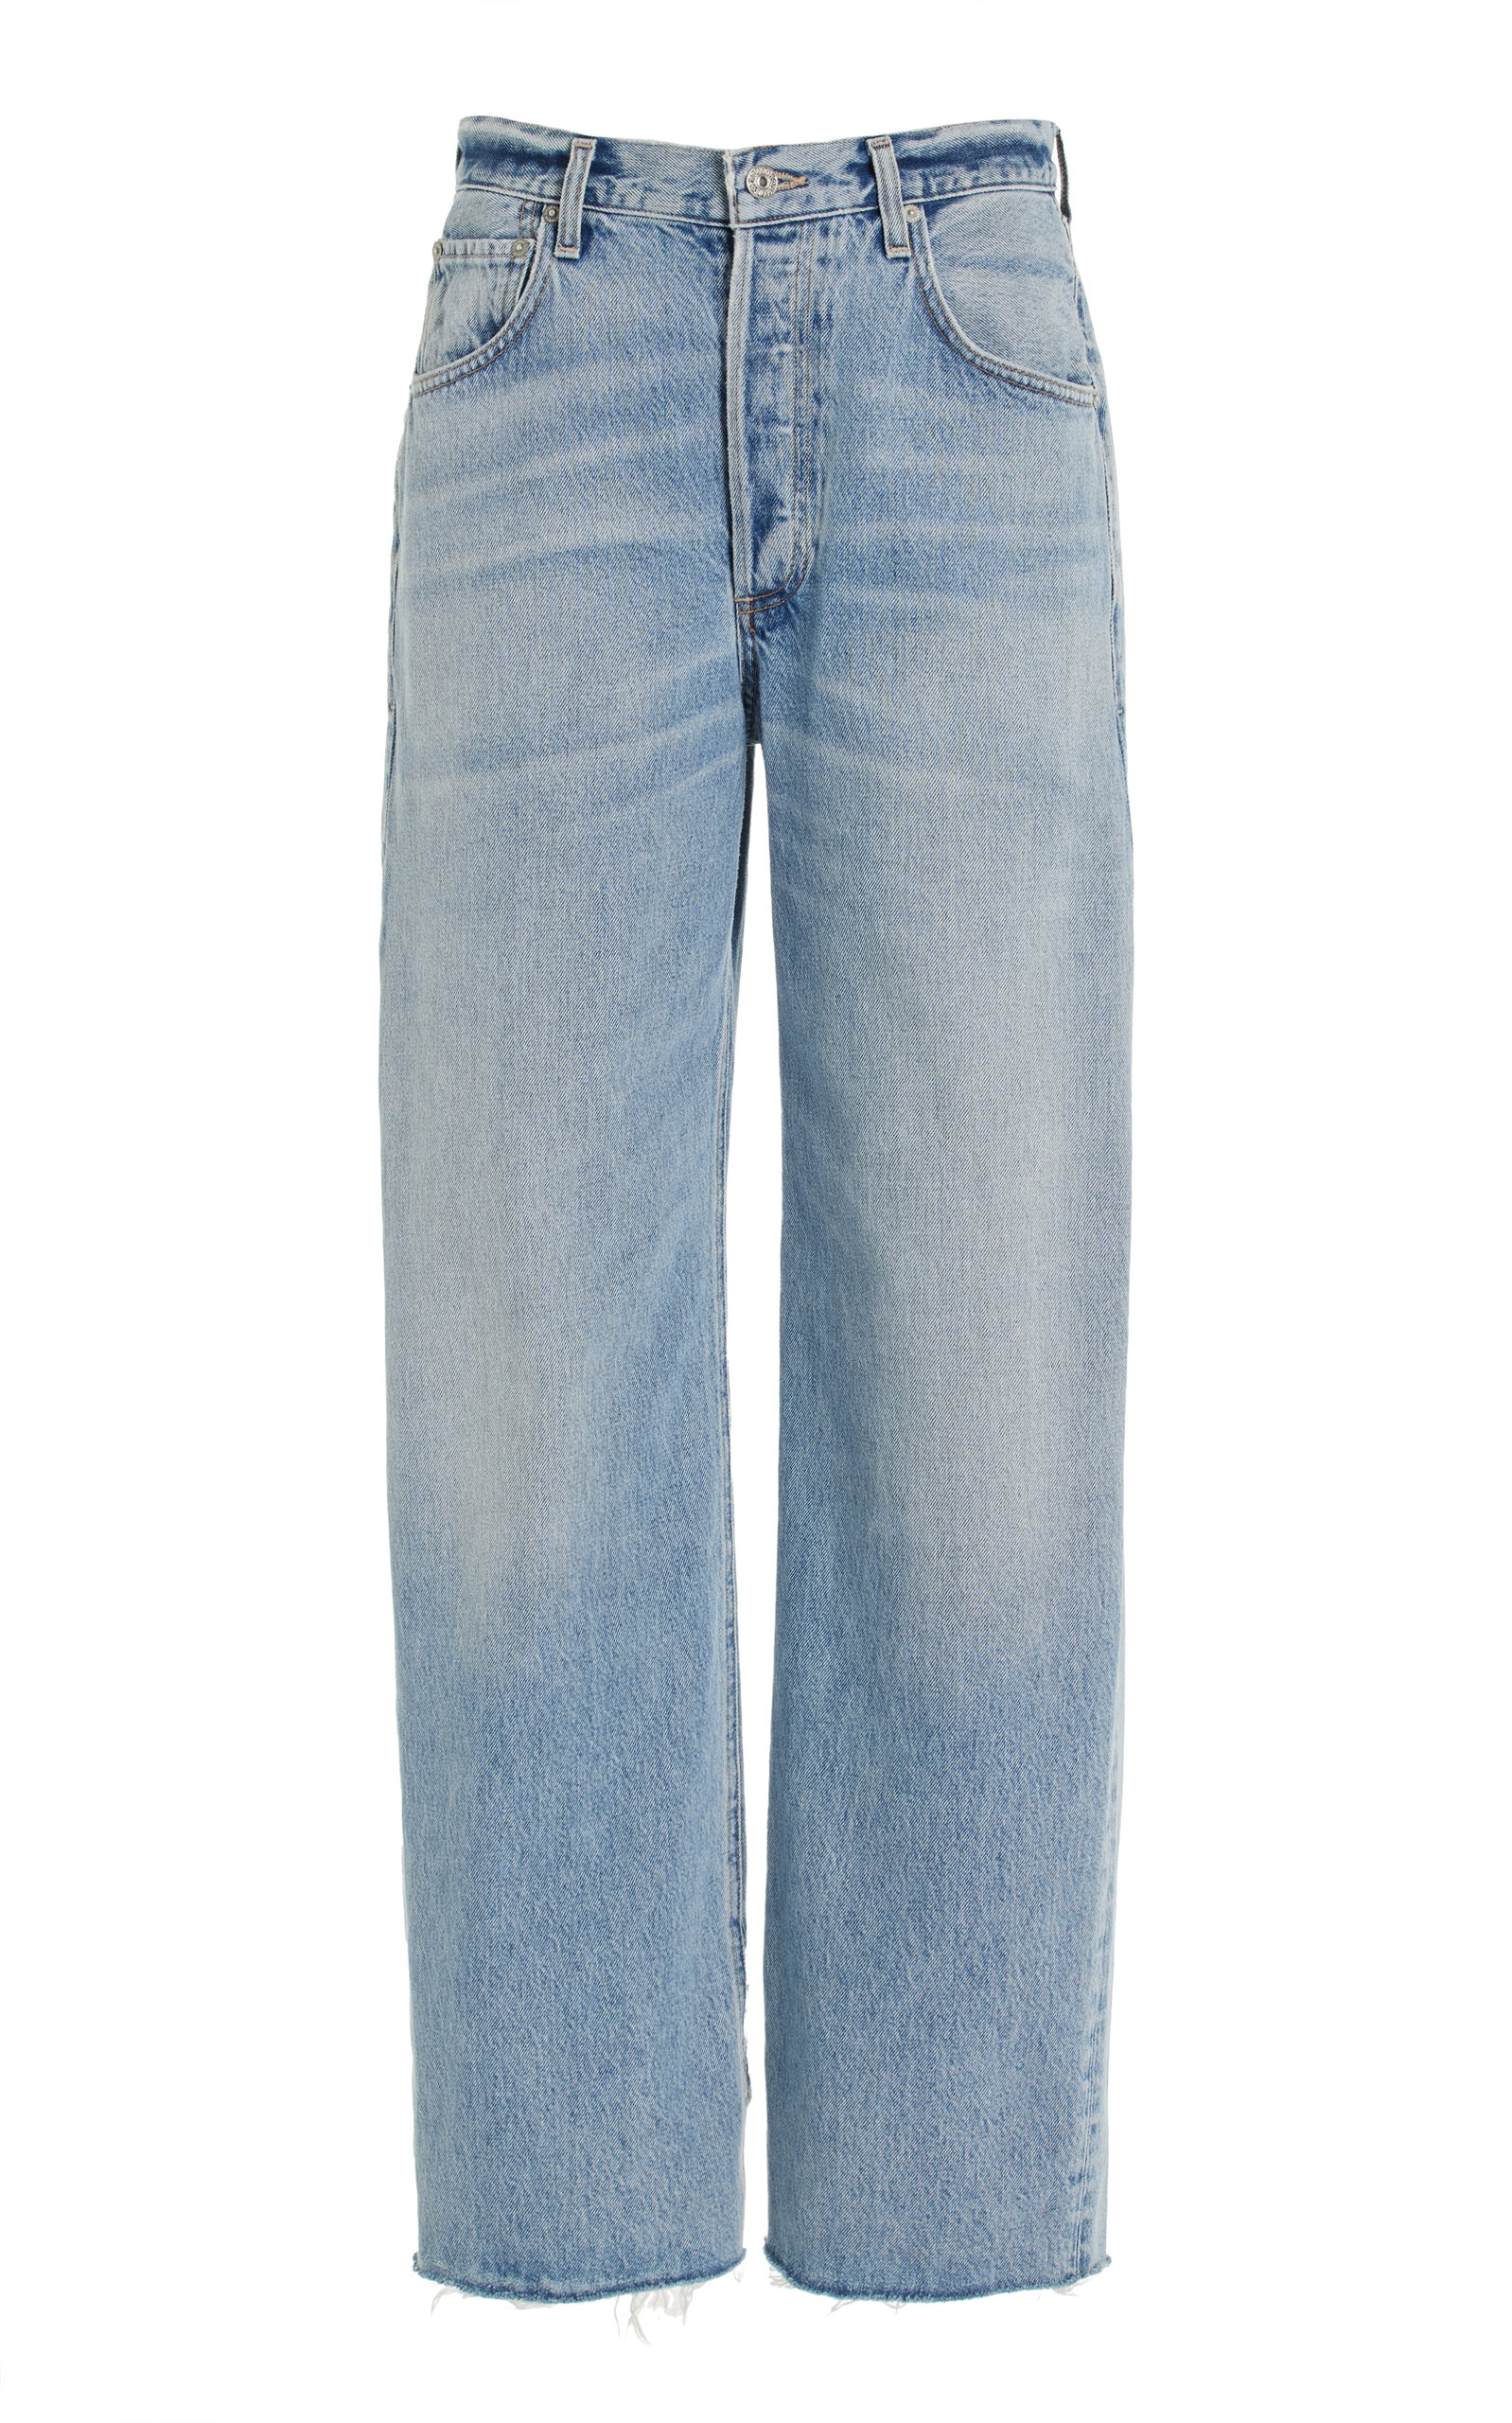 Citizens Of Humanity Ayla Rigid High-rise Wide-leg Jeans In Light Wash